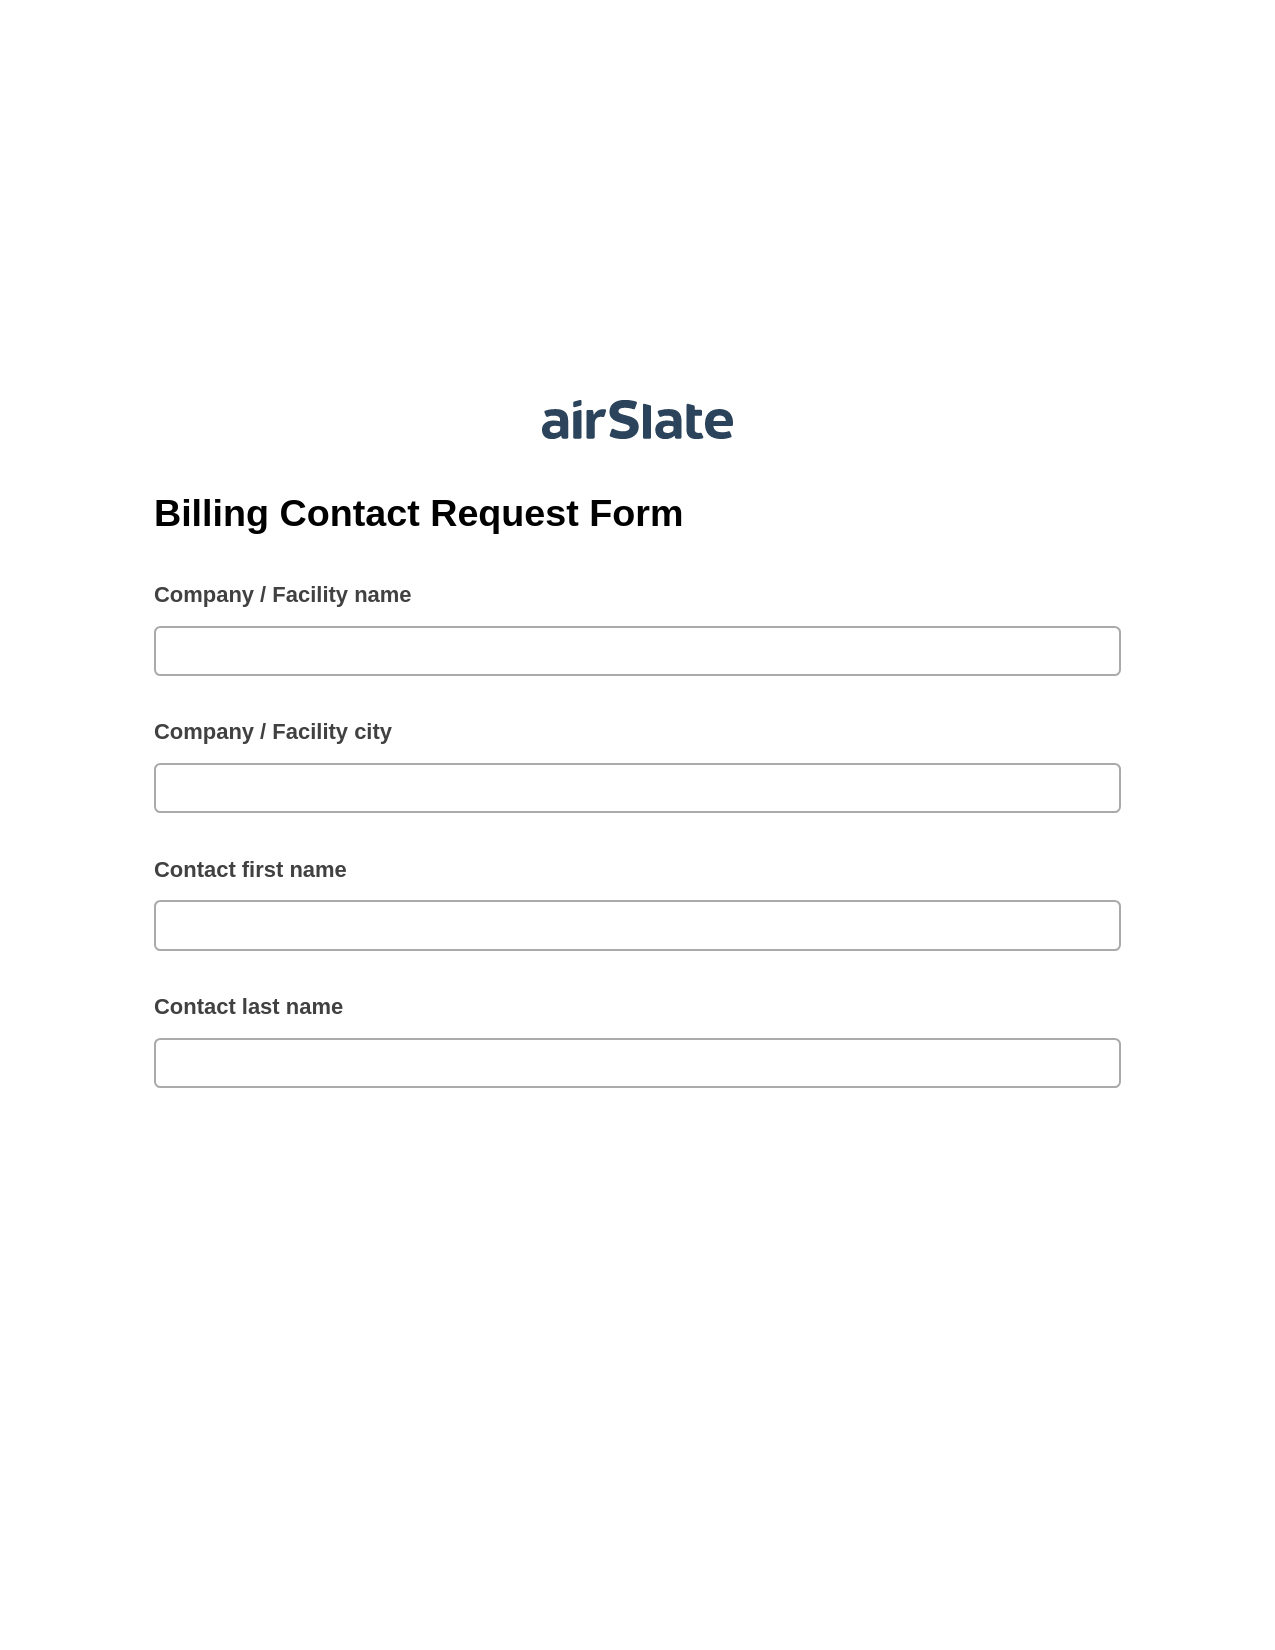 Multirole Billing Contact Request Form Pre-fill Dropdowns from CSV File Bot, Assign Slate Name Bot, Box Bot